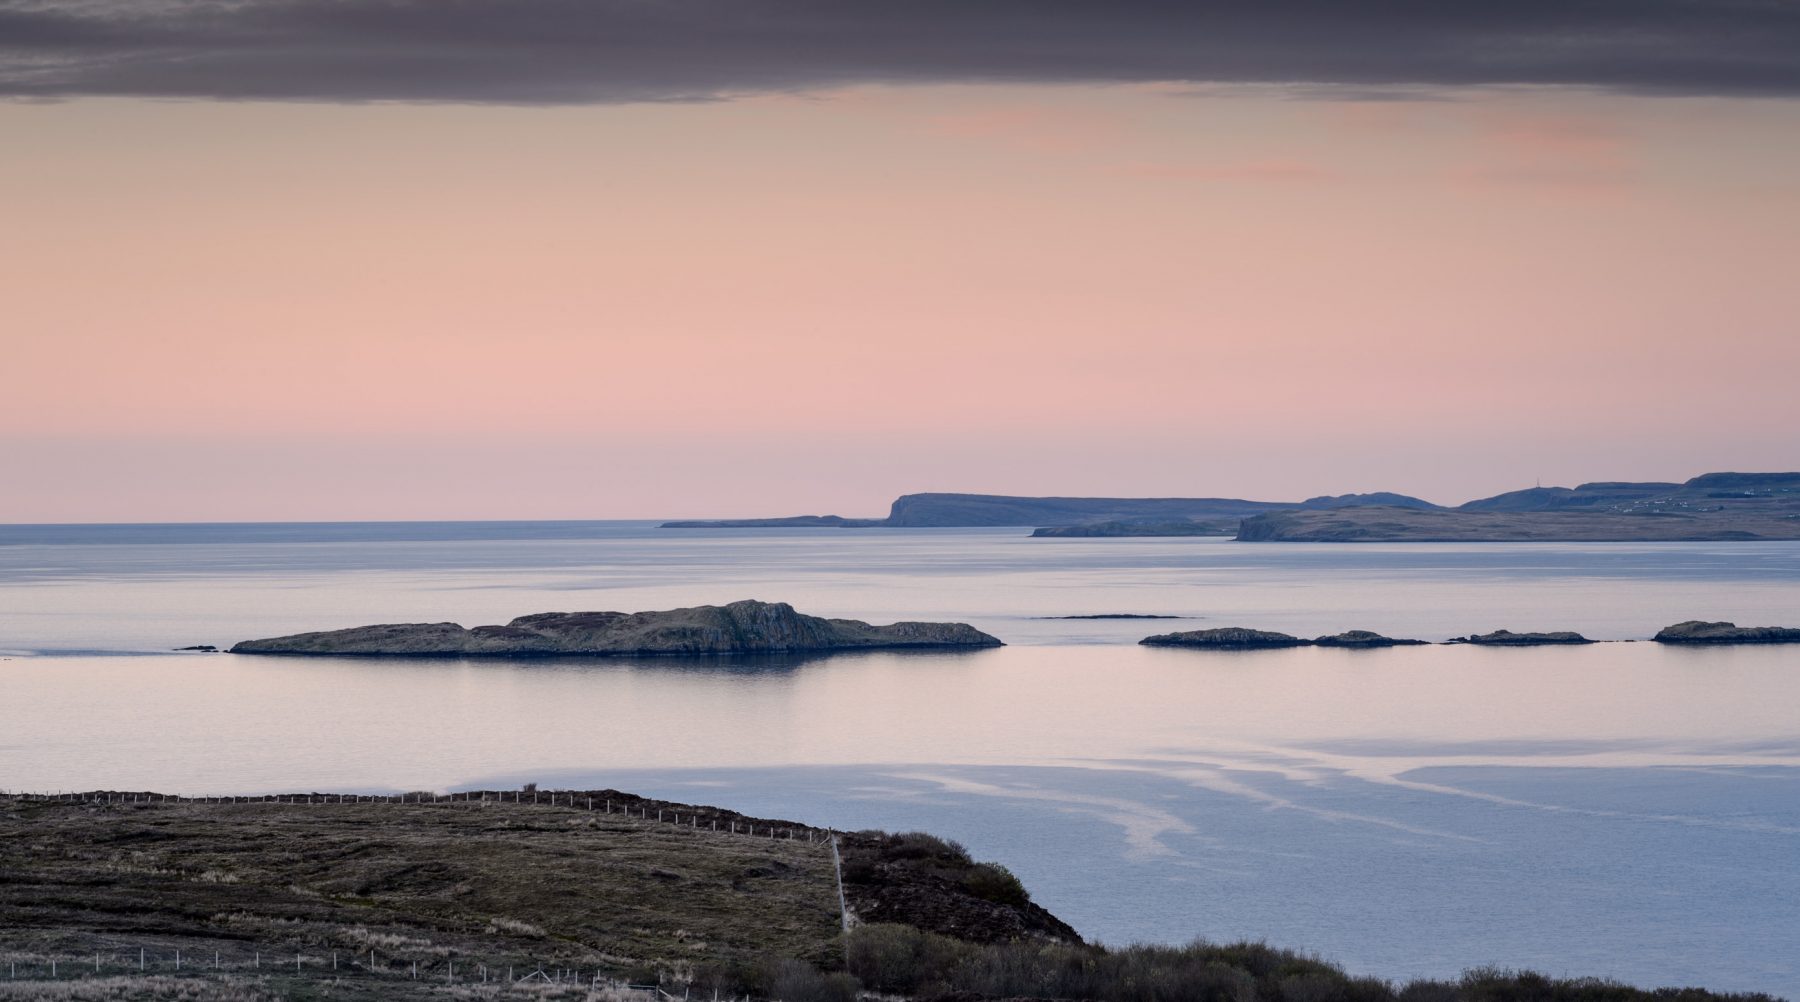 The Ascribe Islands at sunset from Mint Croft luxury self-catering cottages. Stunning sea views from every window.